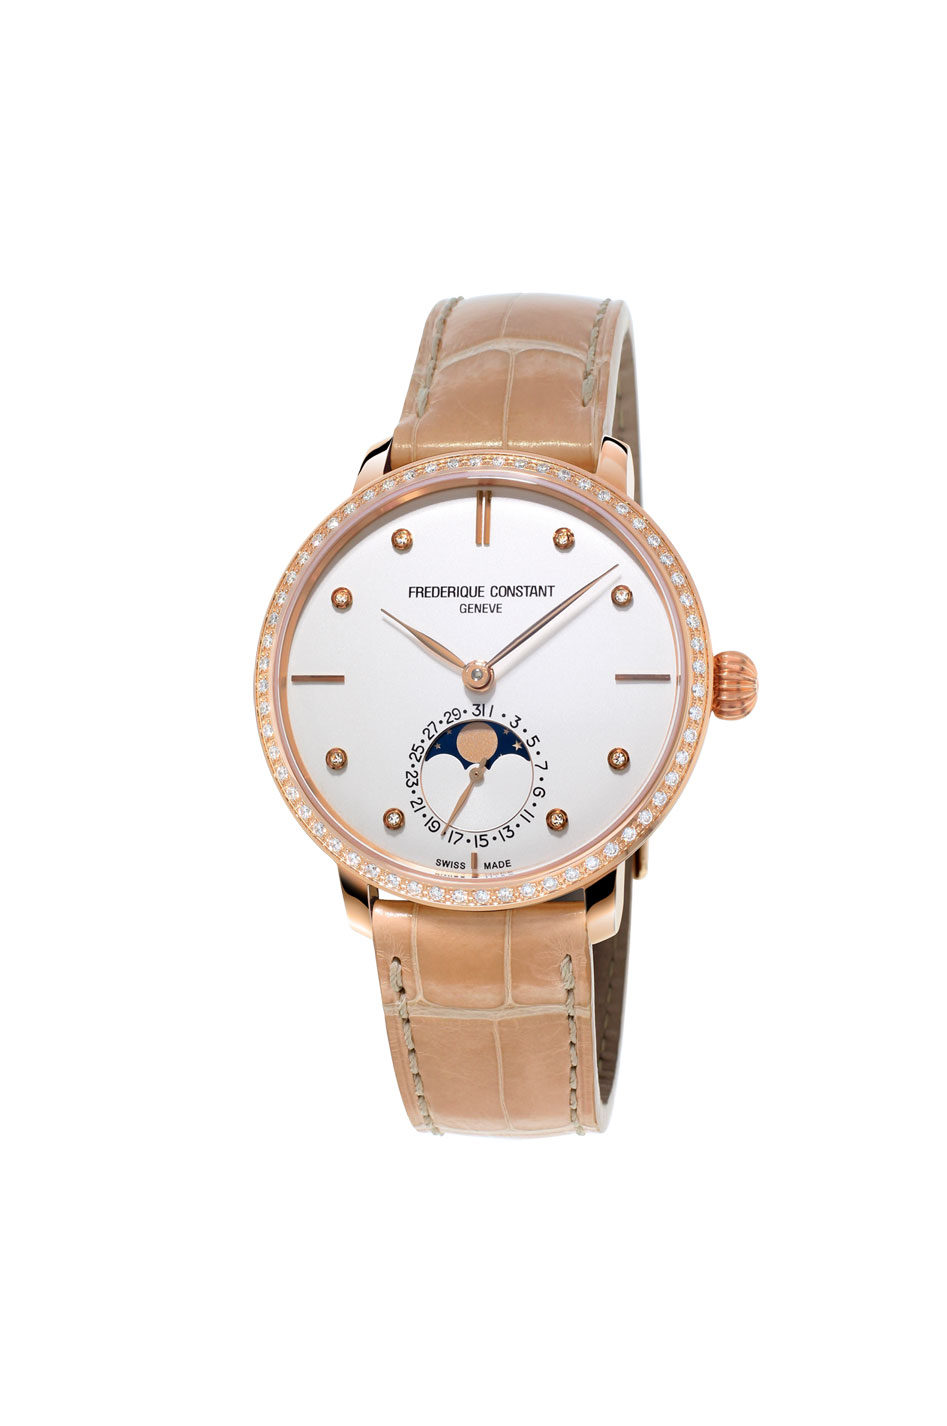 Slimline Moonphase Manufacture For Women